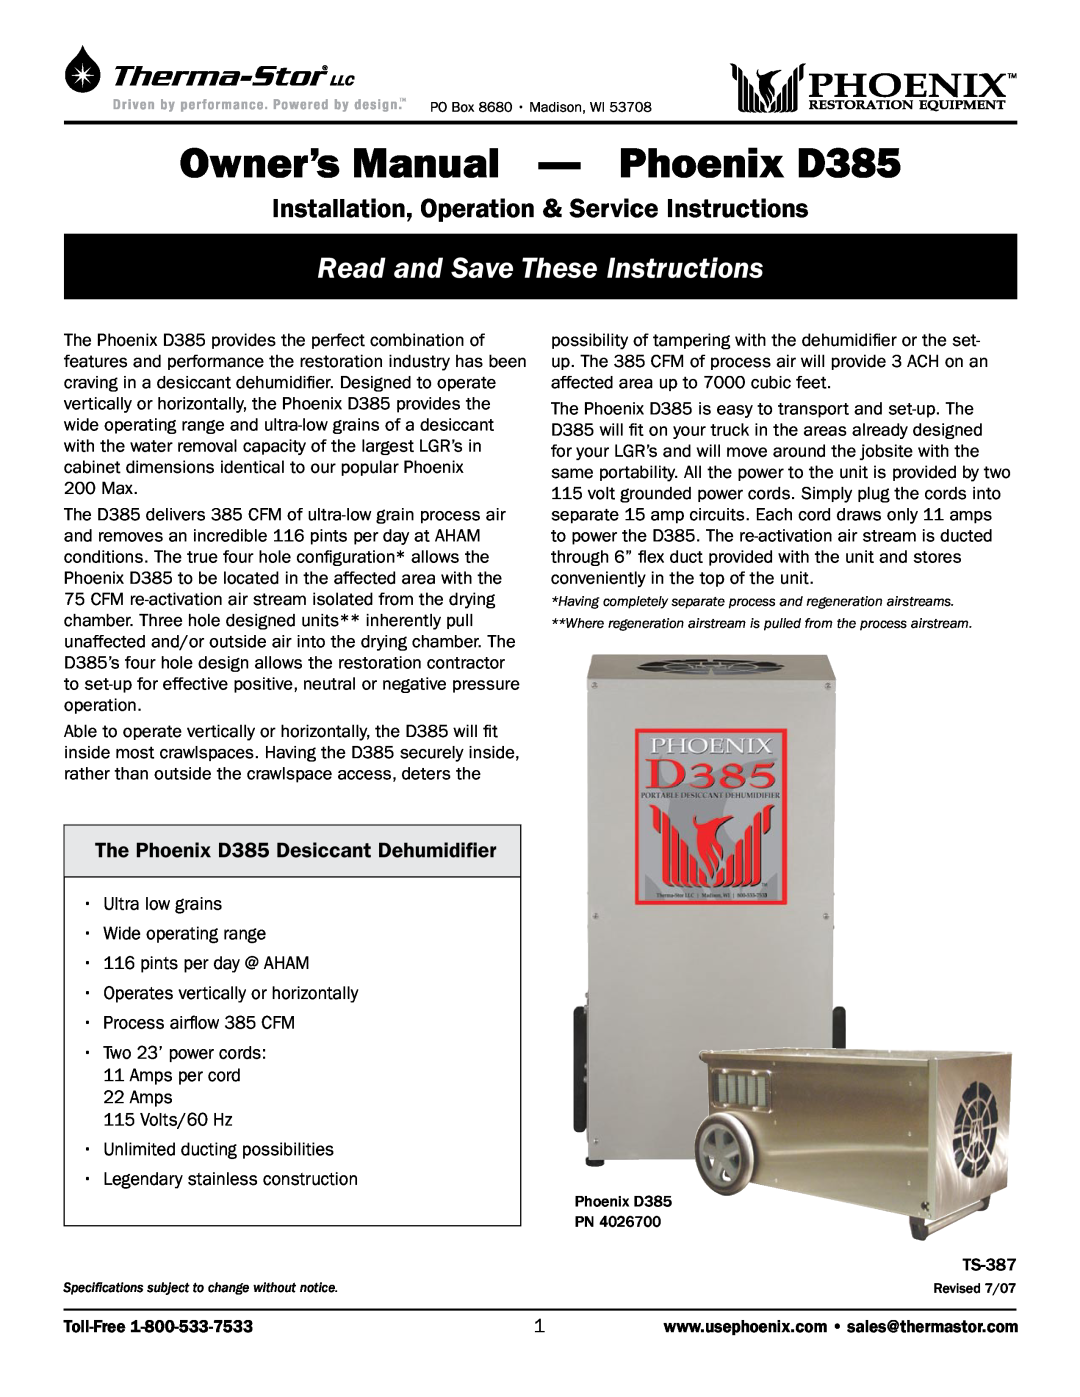 Therma-Stor Products Group owner manual The Phoenix D385 Desiccant Dehumidifier, Owner’s Manual — Phoenix D385 